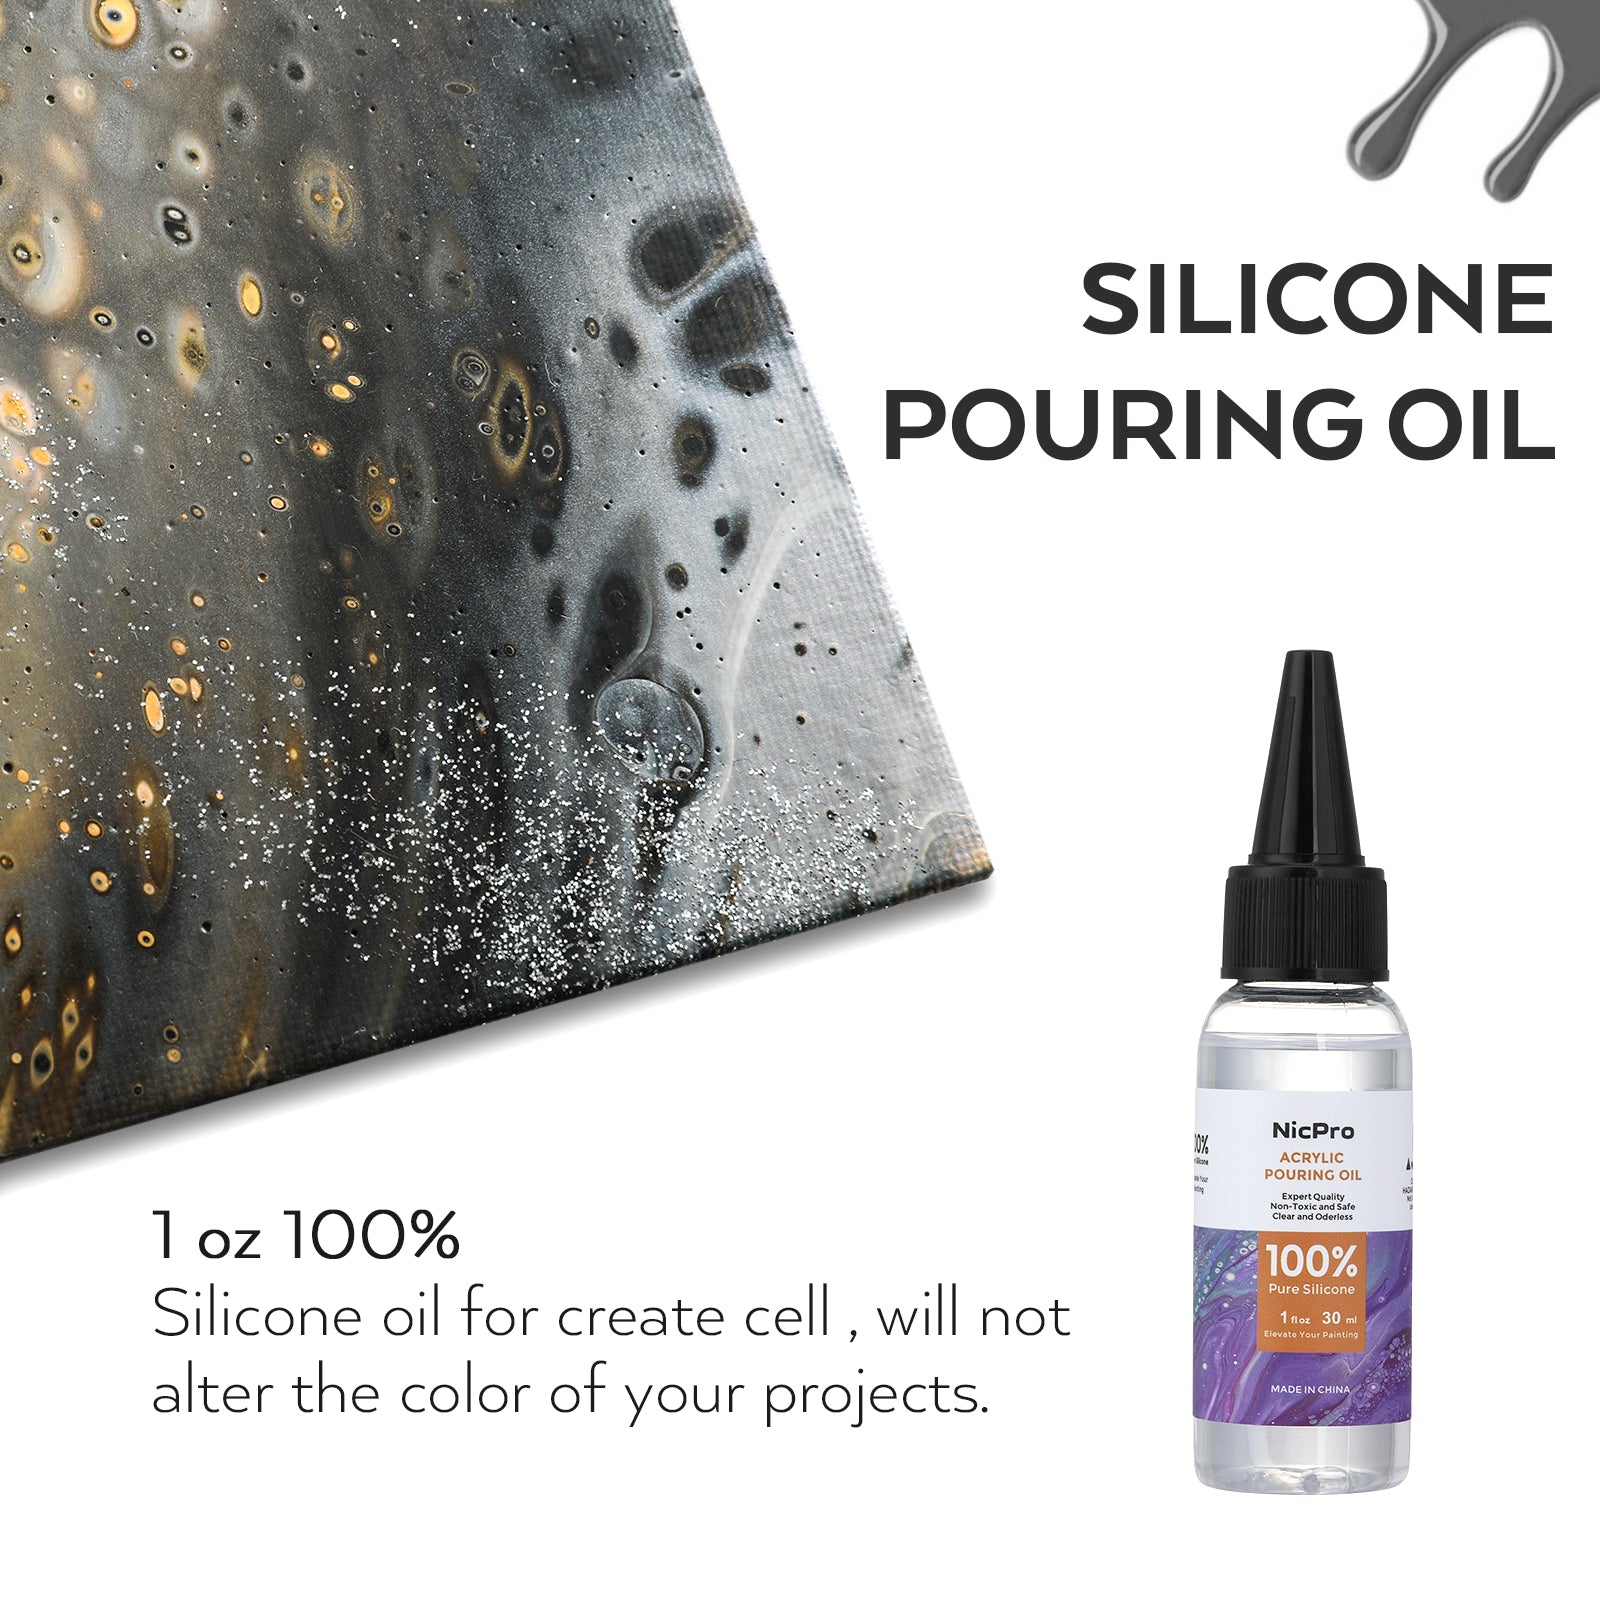 Acrylic Pouring Paint Pre-Mixed High Flow Liquid Acrylic Paint Pouring Supplies with Silicone Oil (30ML) for Pouring, Clear